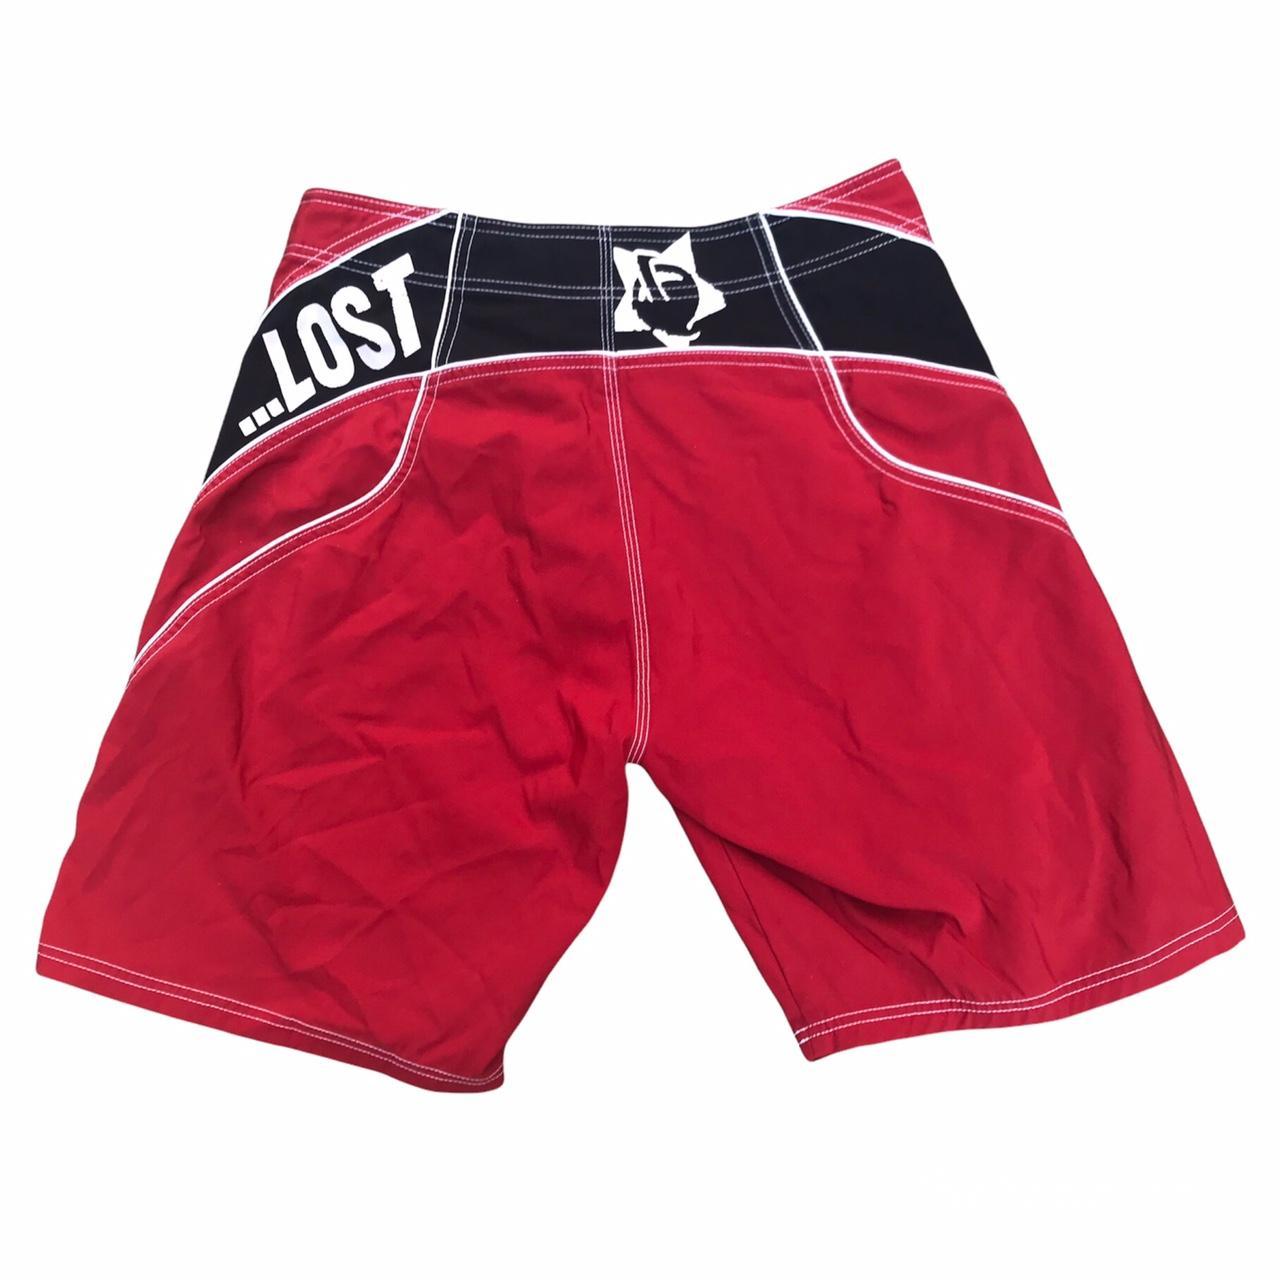 Product Image 2 - Lost shorts no pun intended